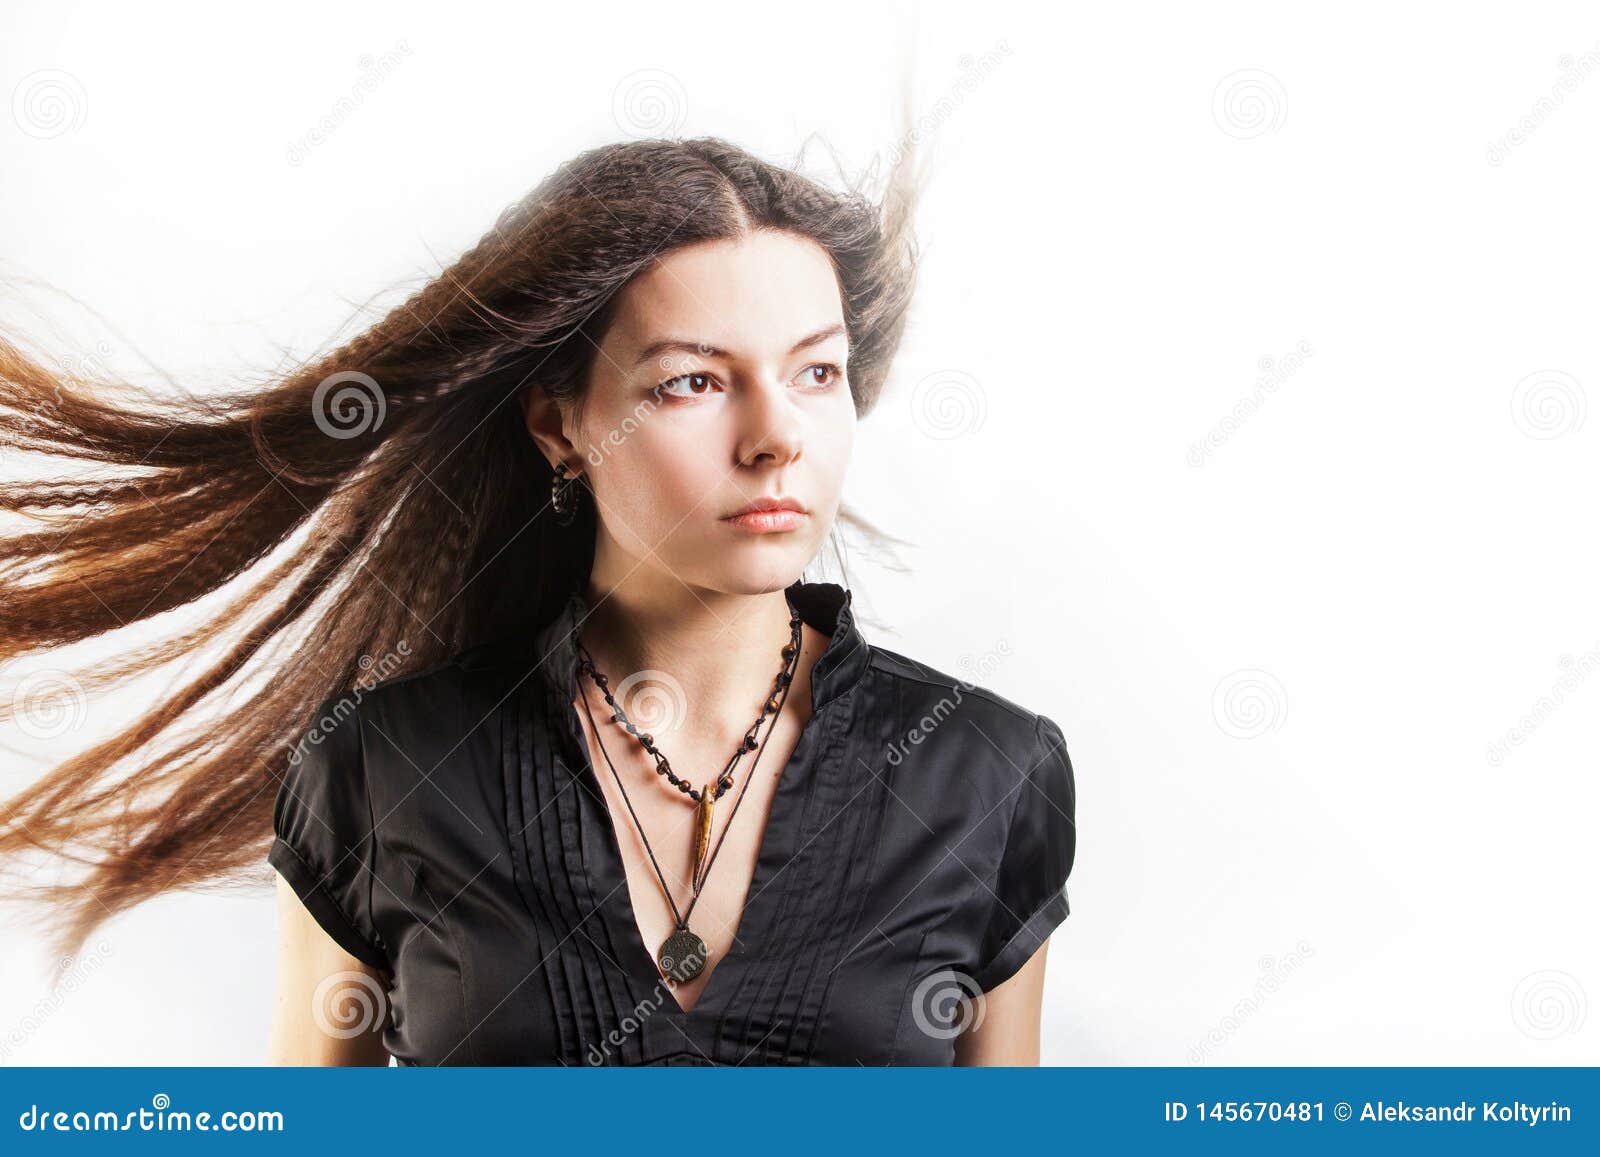 Beautiful Long-haired Young Woman Has a Dream Stock Image - Image of ...